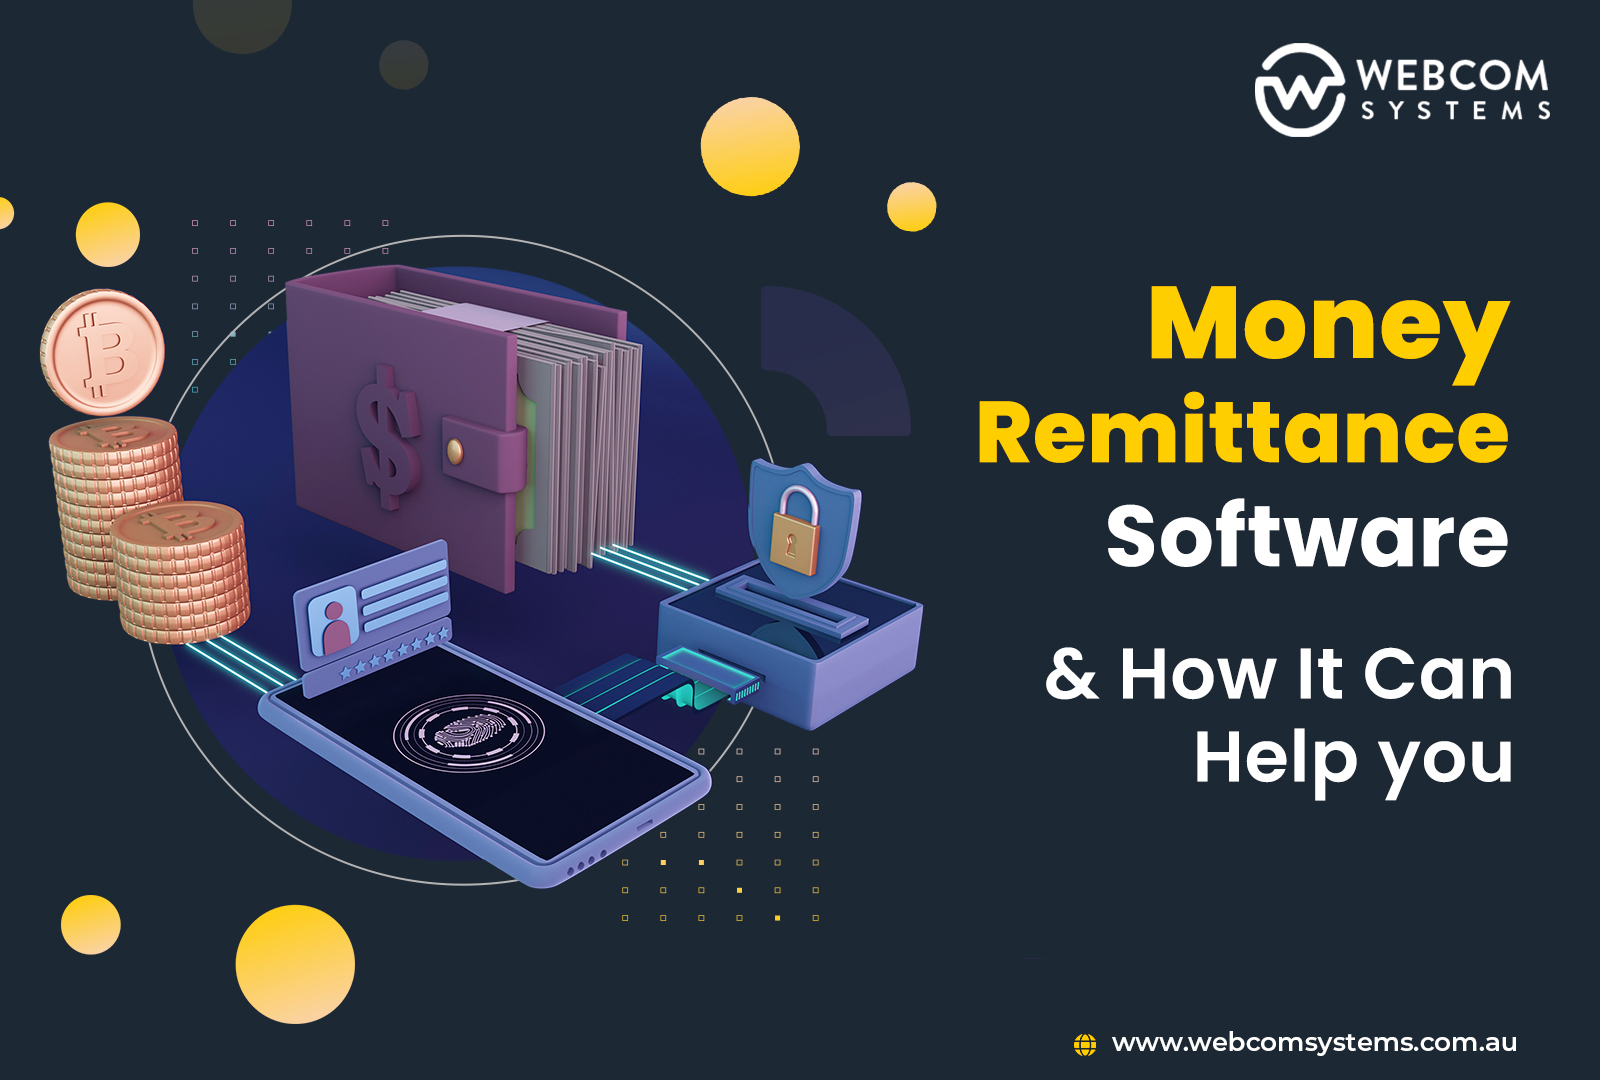 Money Remittance Software & How It Can Help You